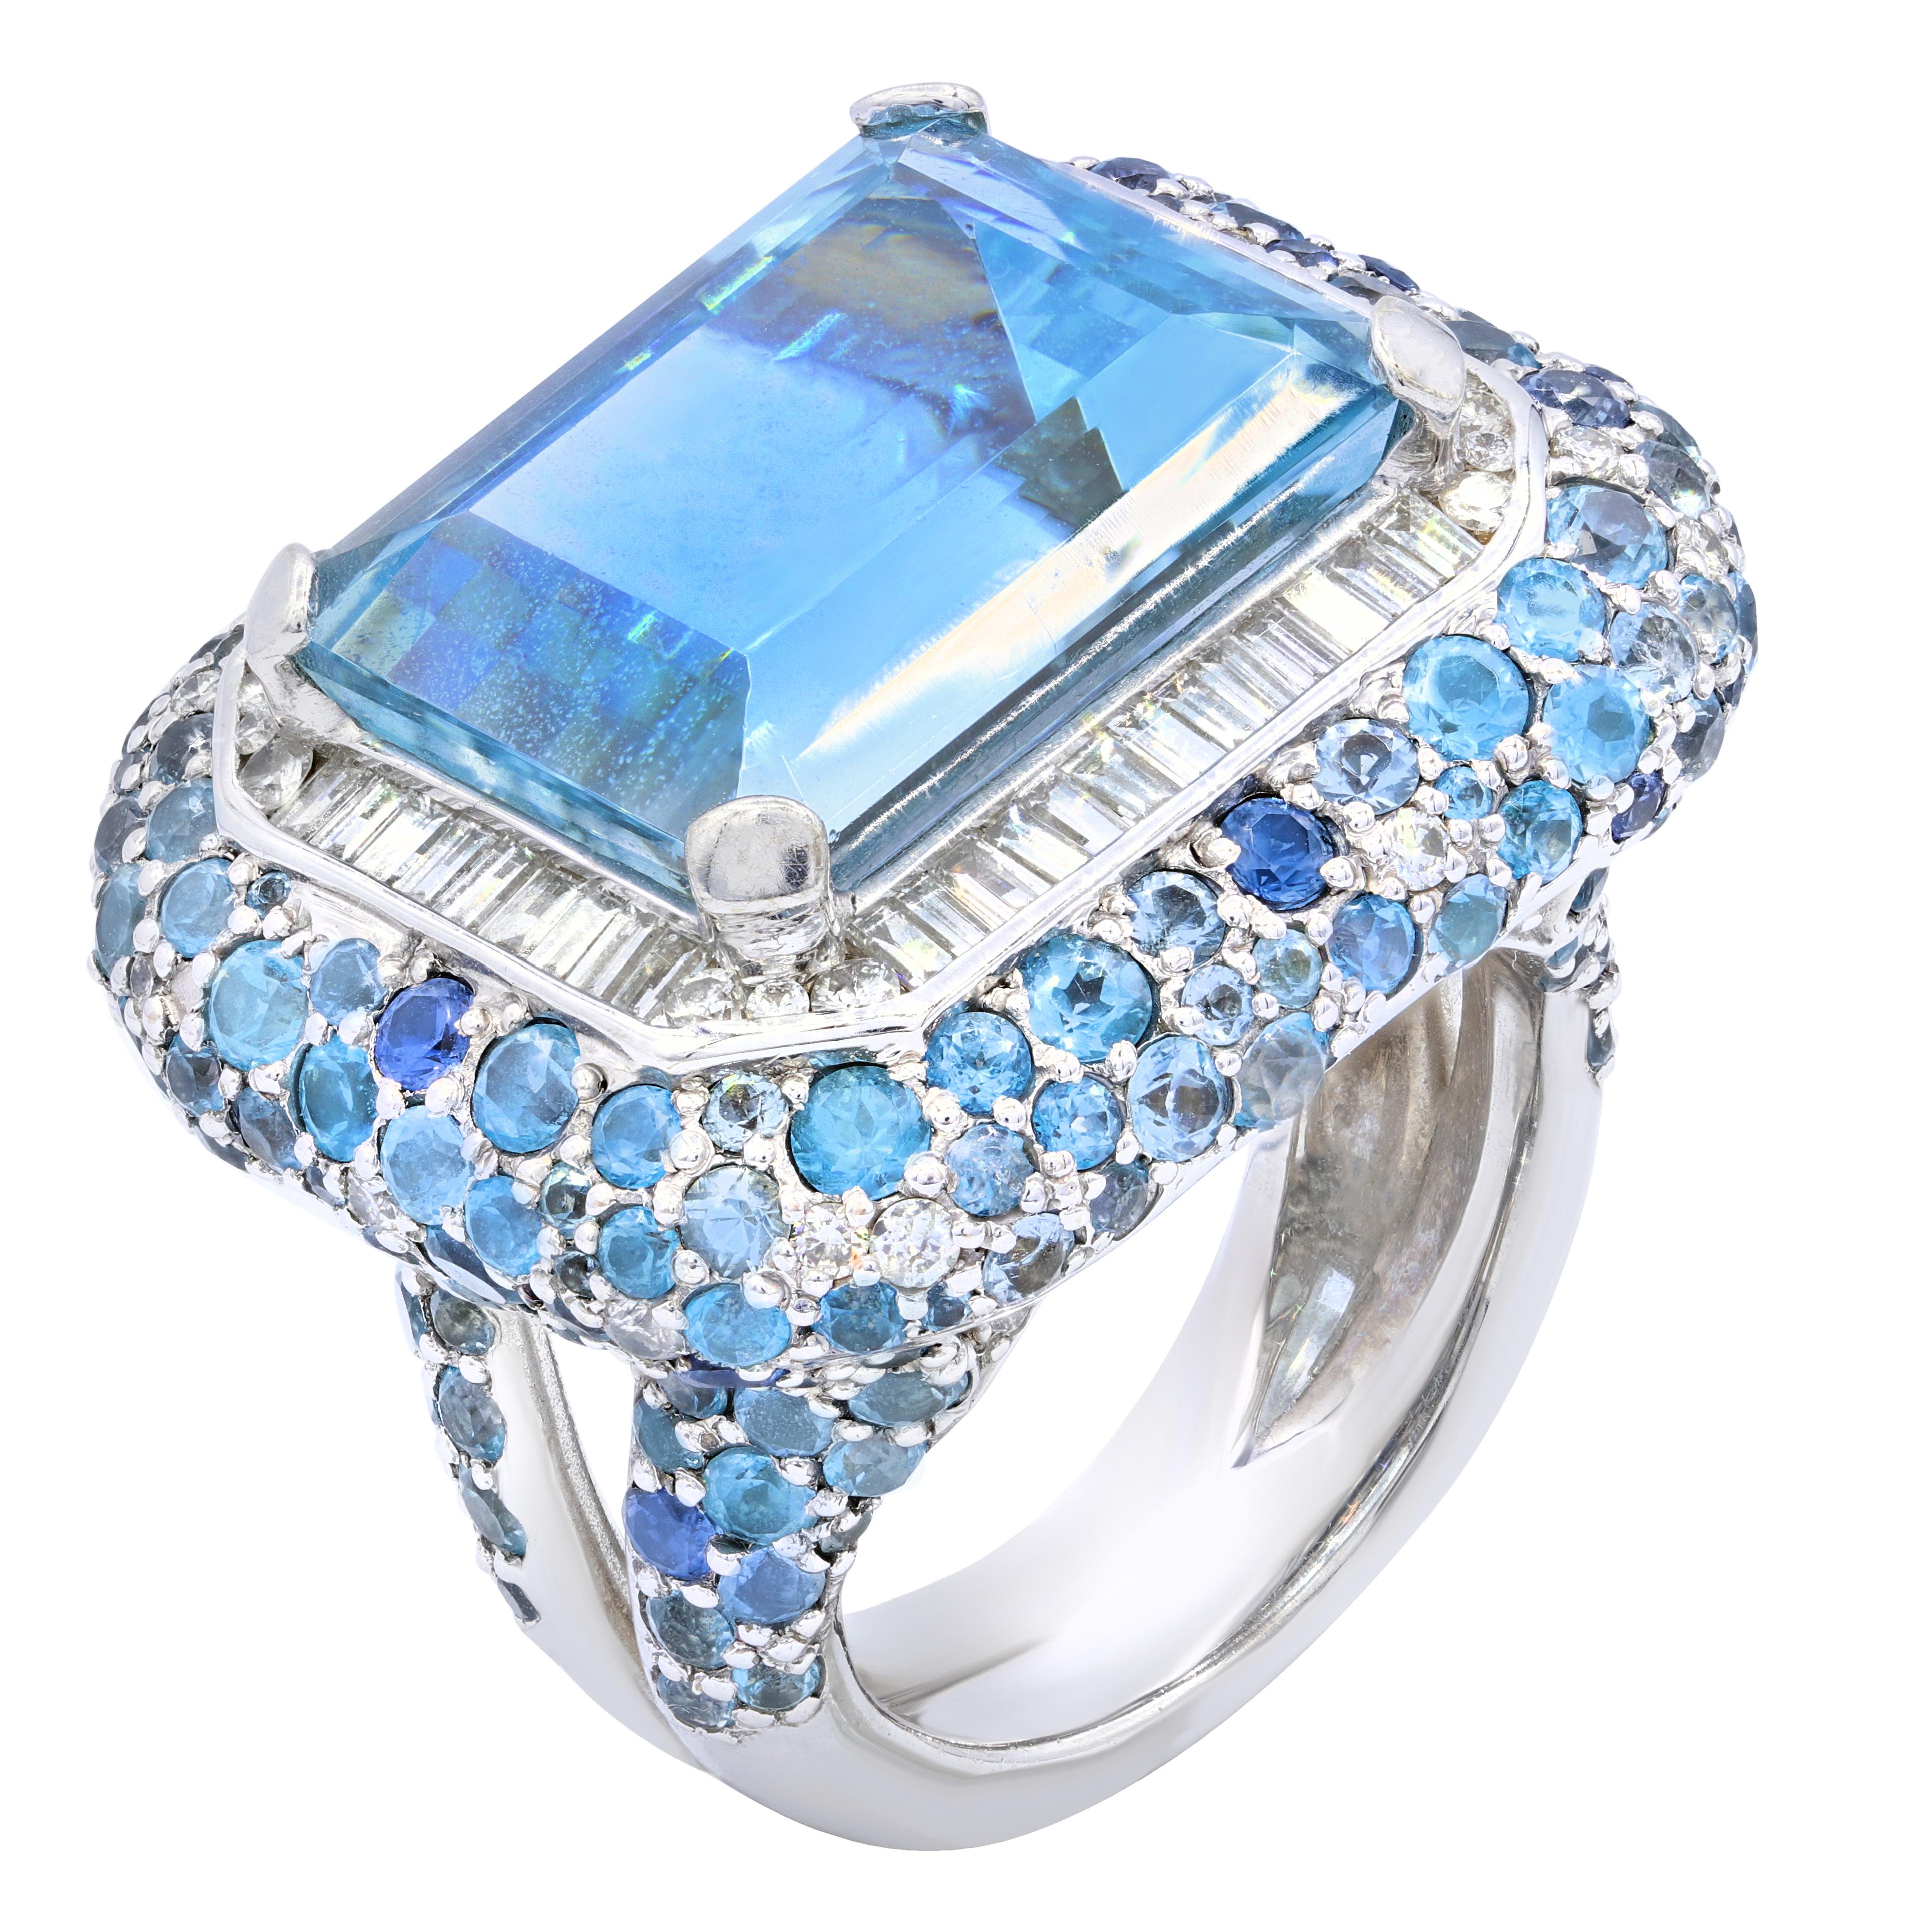 White gold diamond aquamarine ring  features 20.00 Carats Emerald cut Aquamarine center stone, surrounded by 1.50 Carats of baguette cut diamonds.